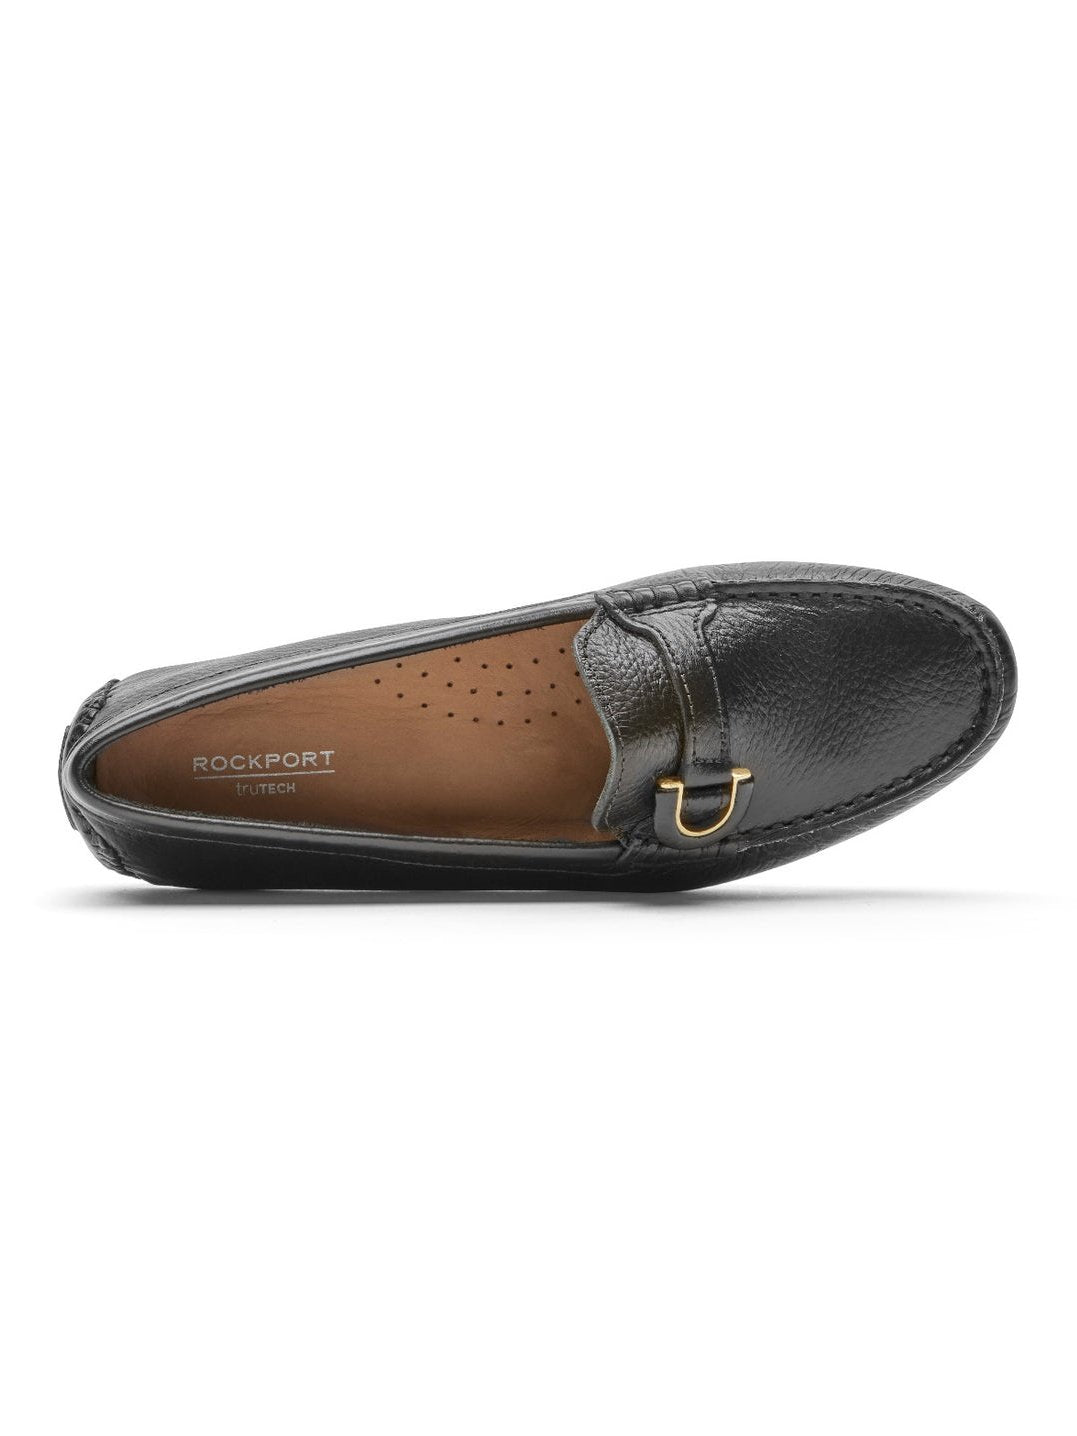 Rockport Women's Bayview Ring Loafer Black CI7415.